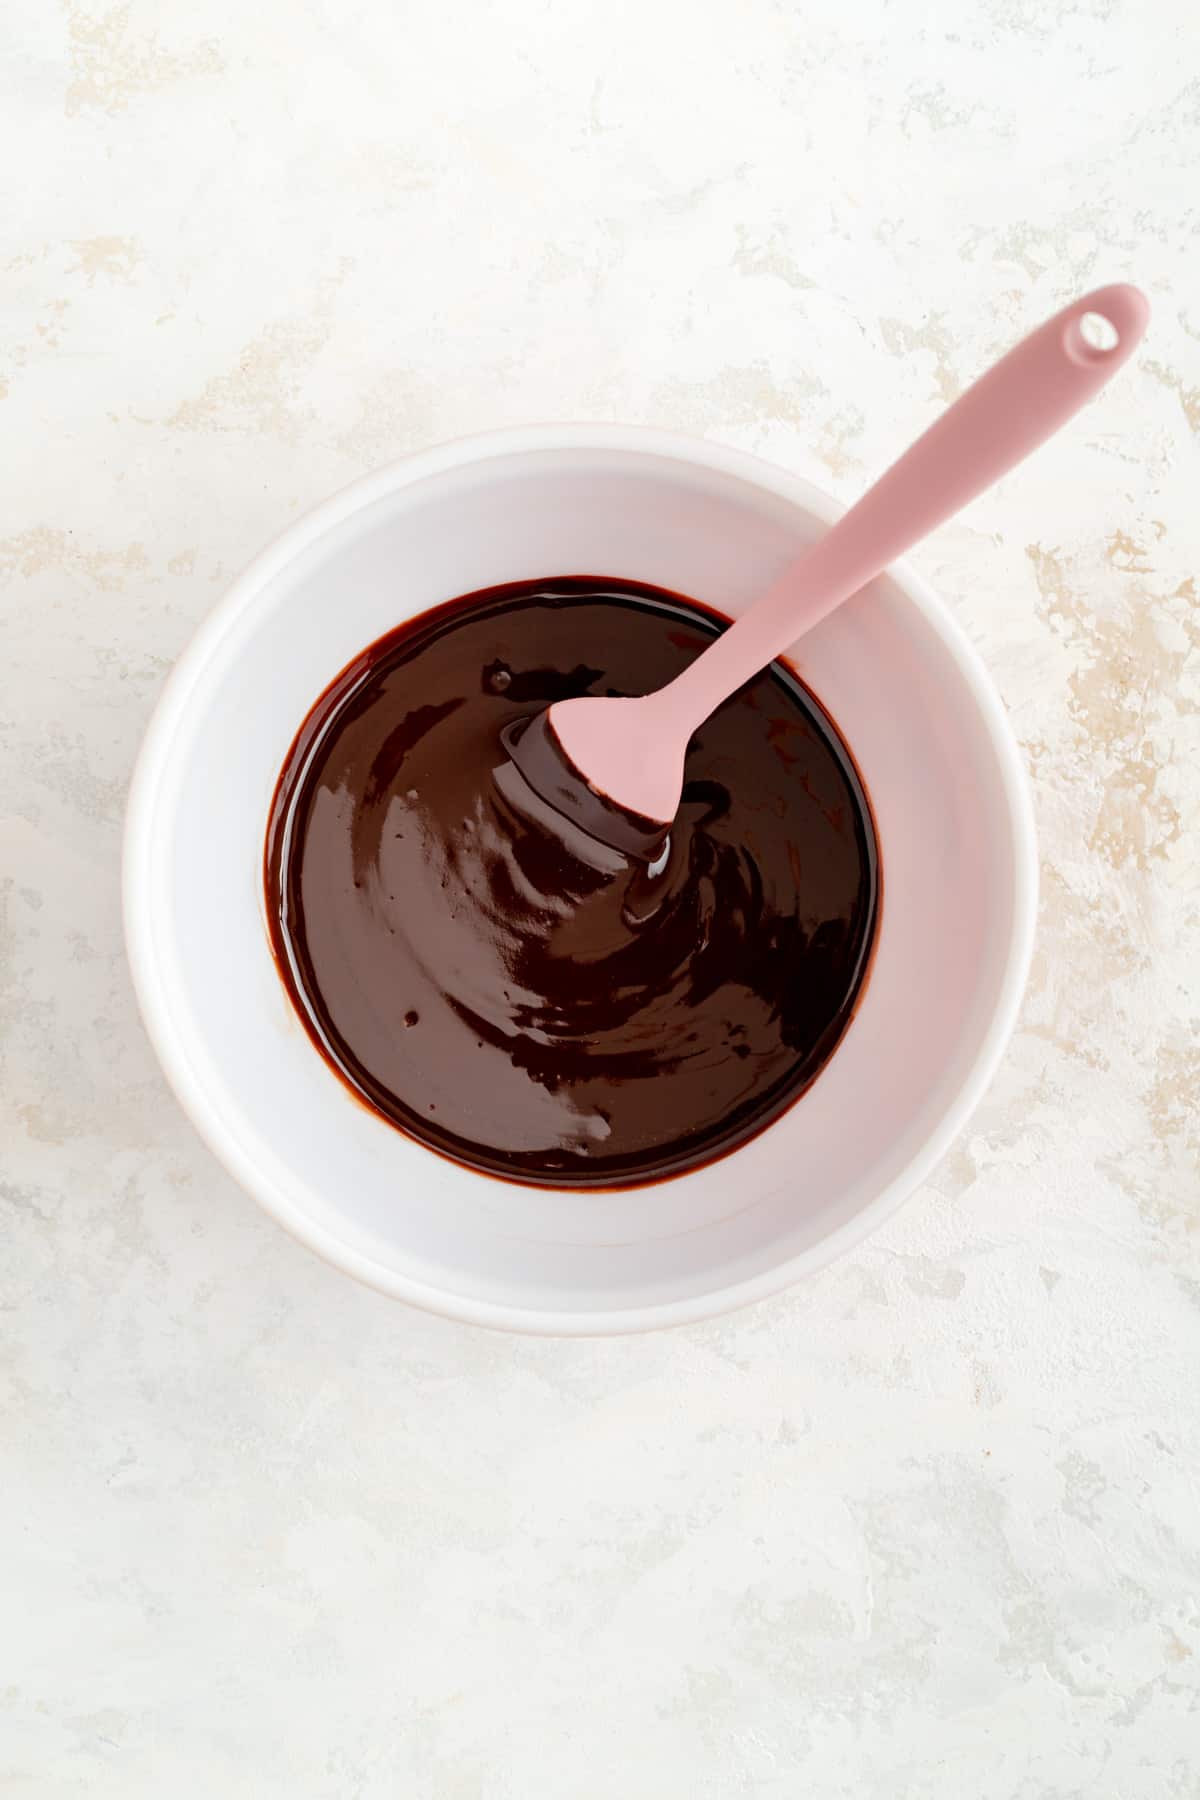 Melted chocolate and butter stirred together in a white bowl with a pink spatula.